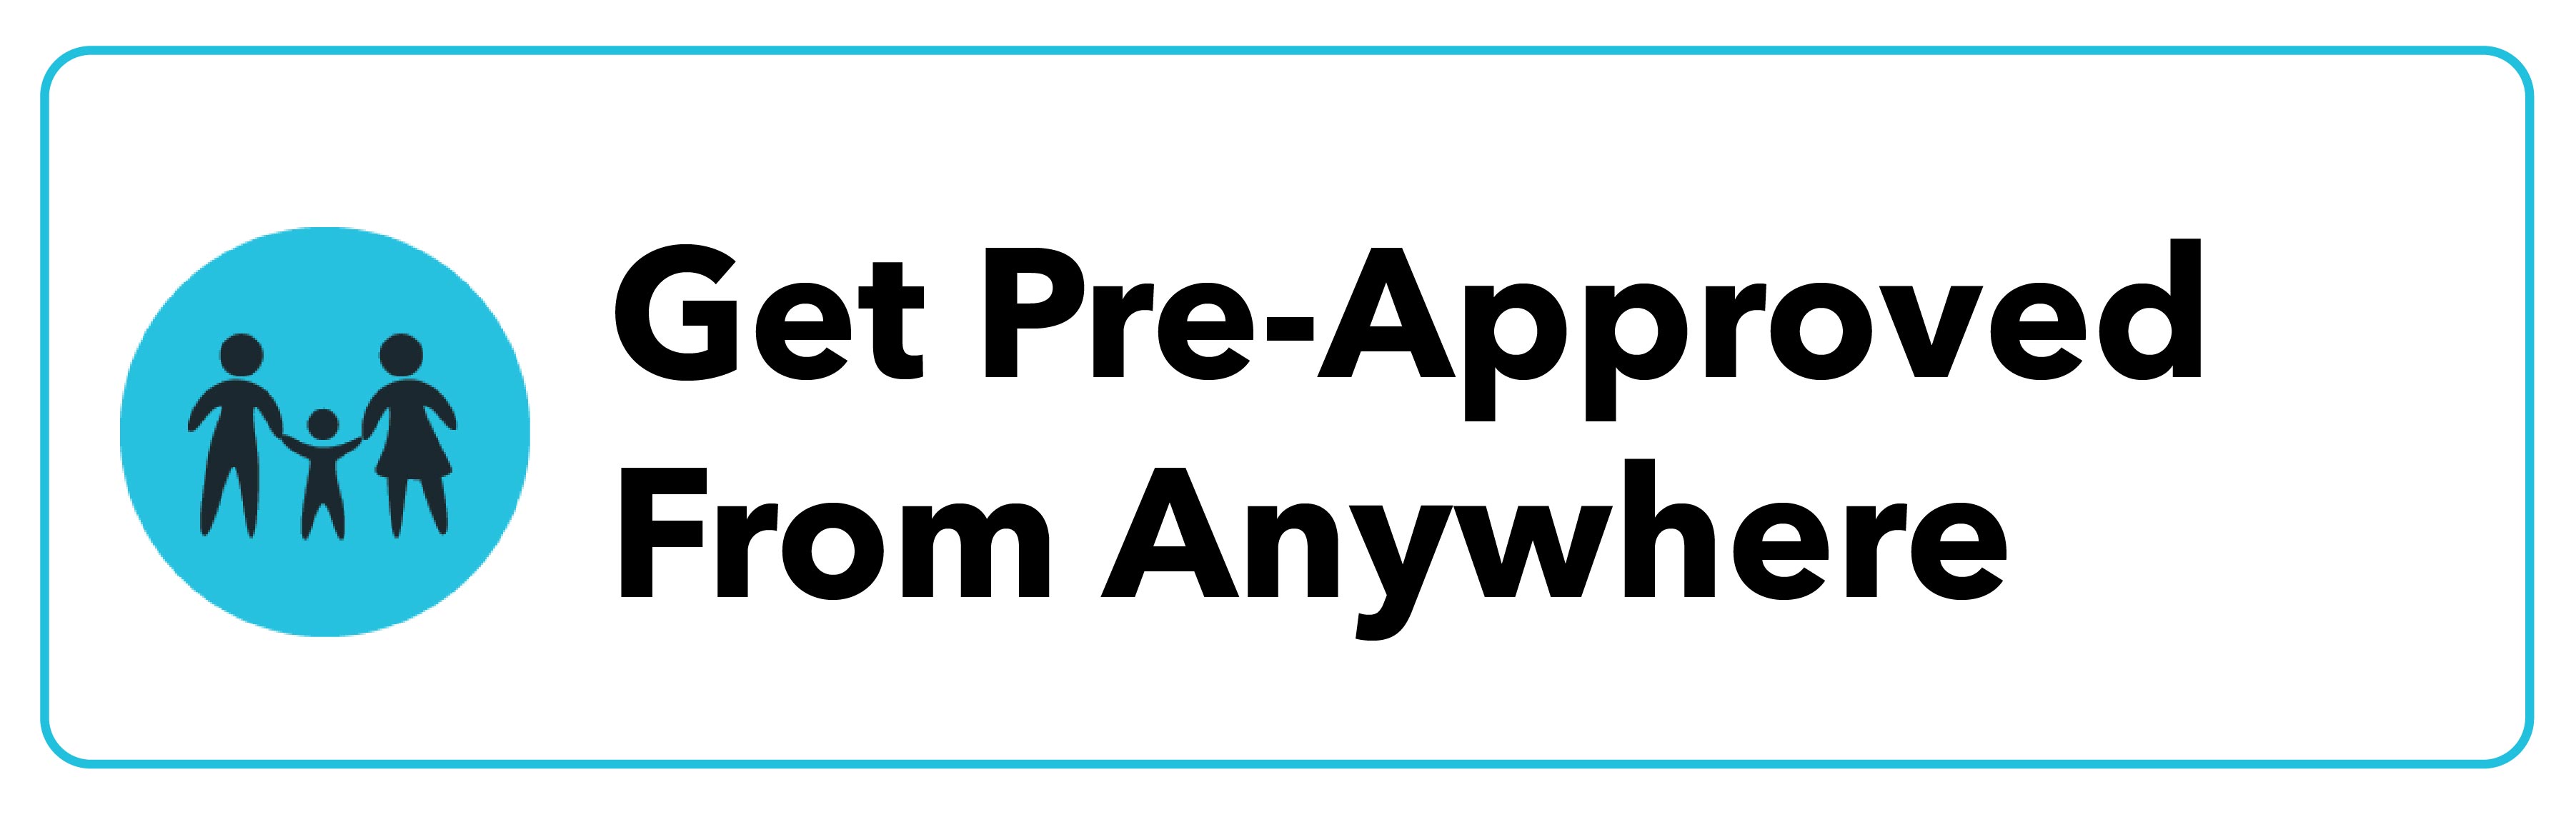 Get Pre-Approved From Anywhere